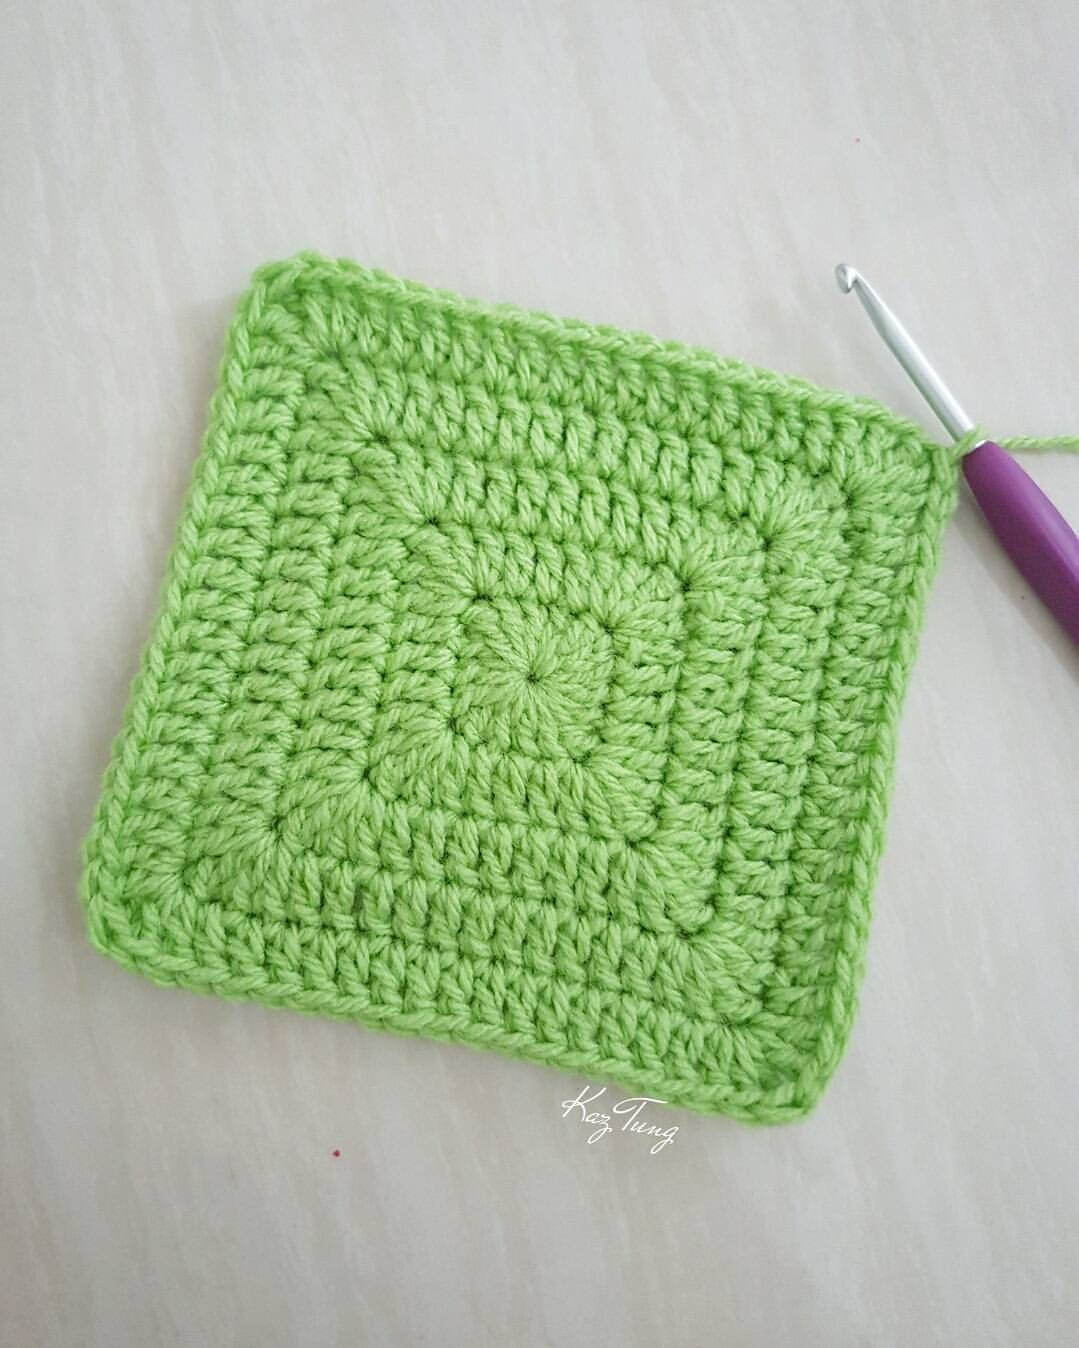 Crochet Granny Square Pattern Solid Granny Square Without Gaps Just Keep Doing 2dc 1tr 2dc Into